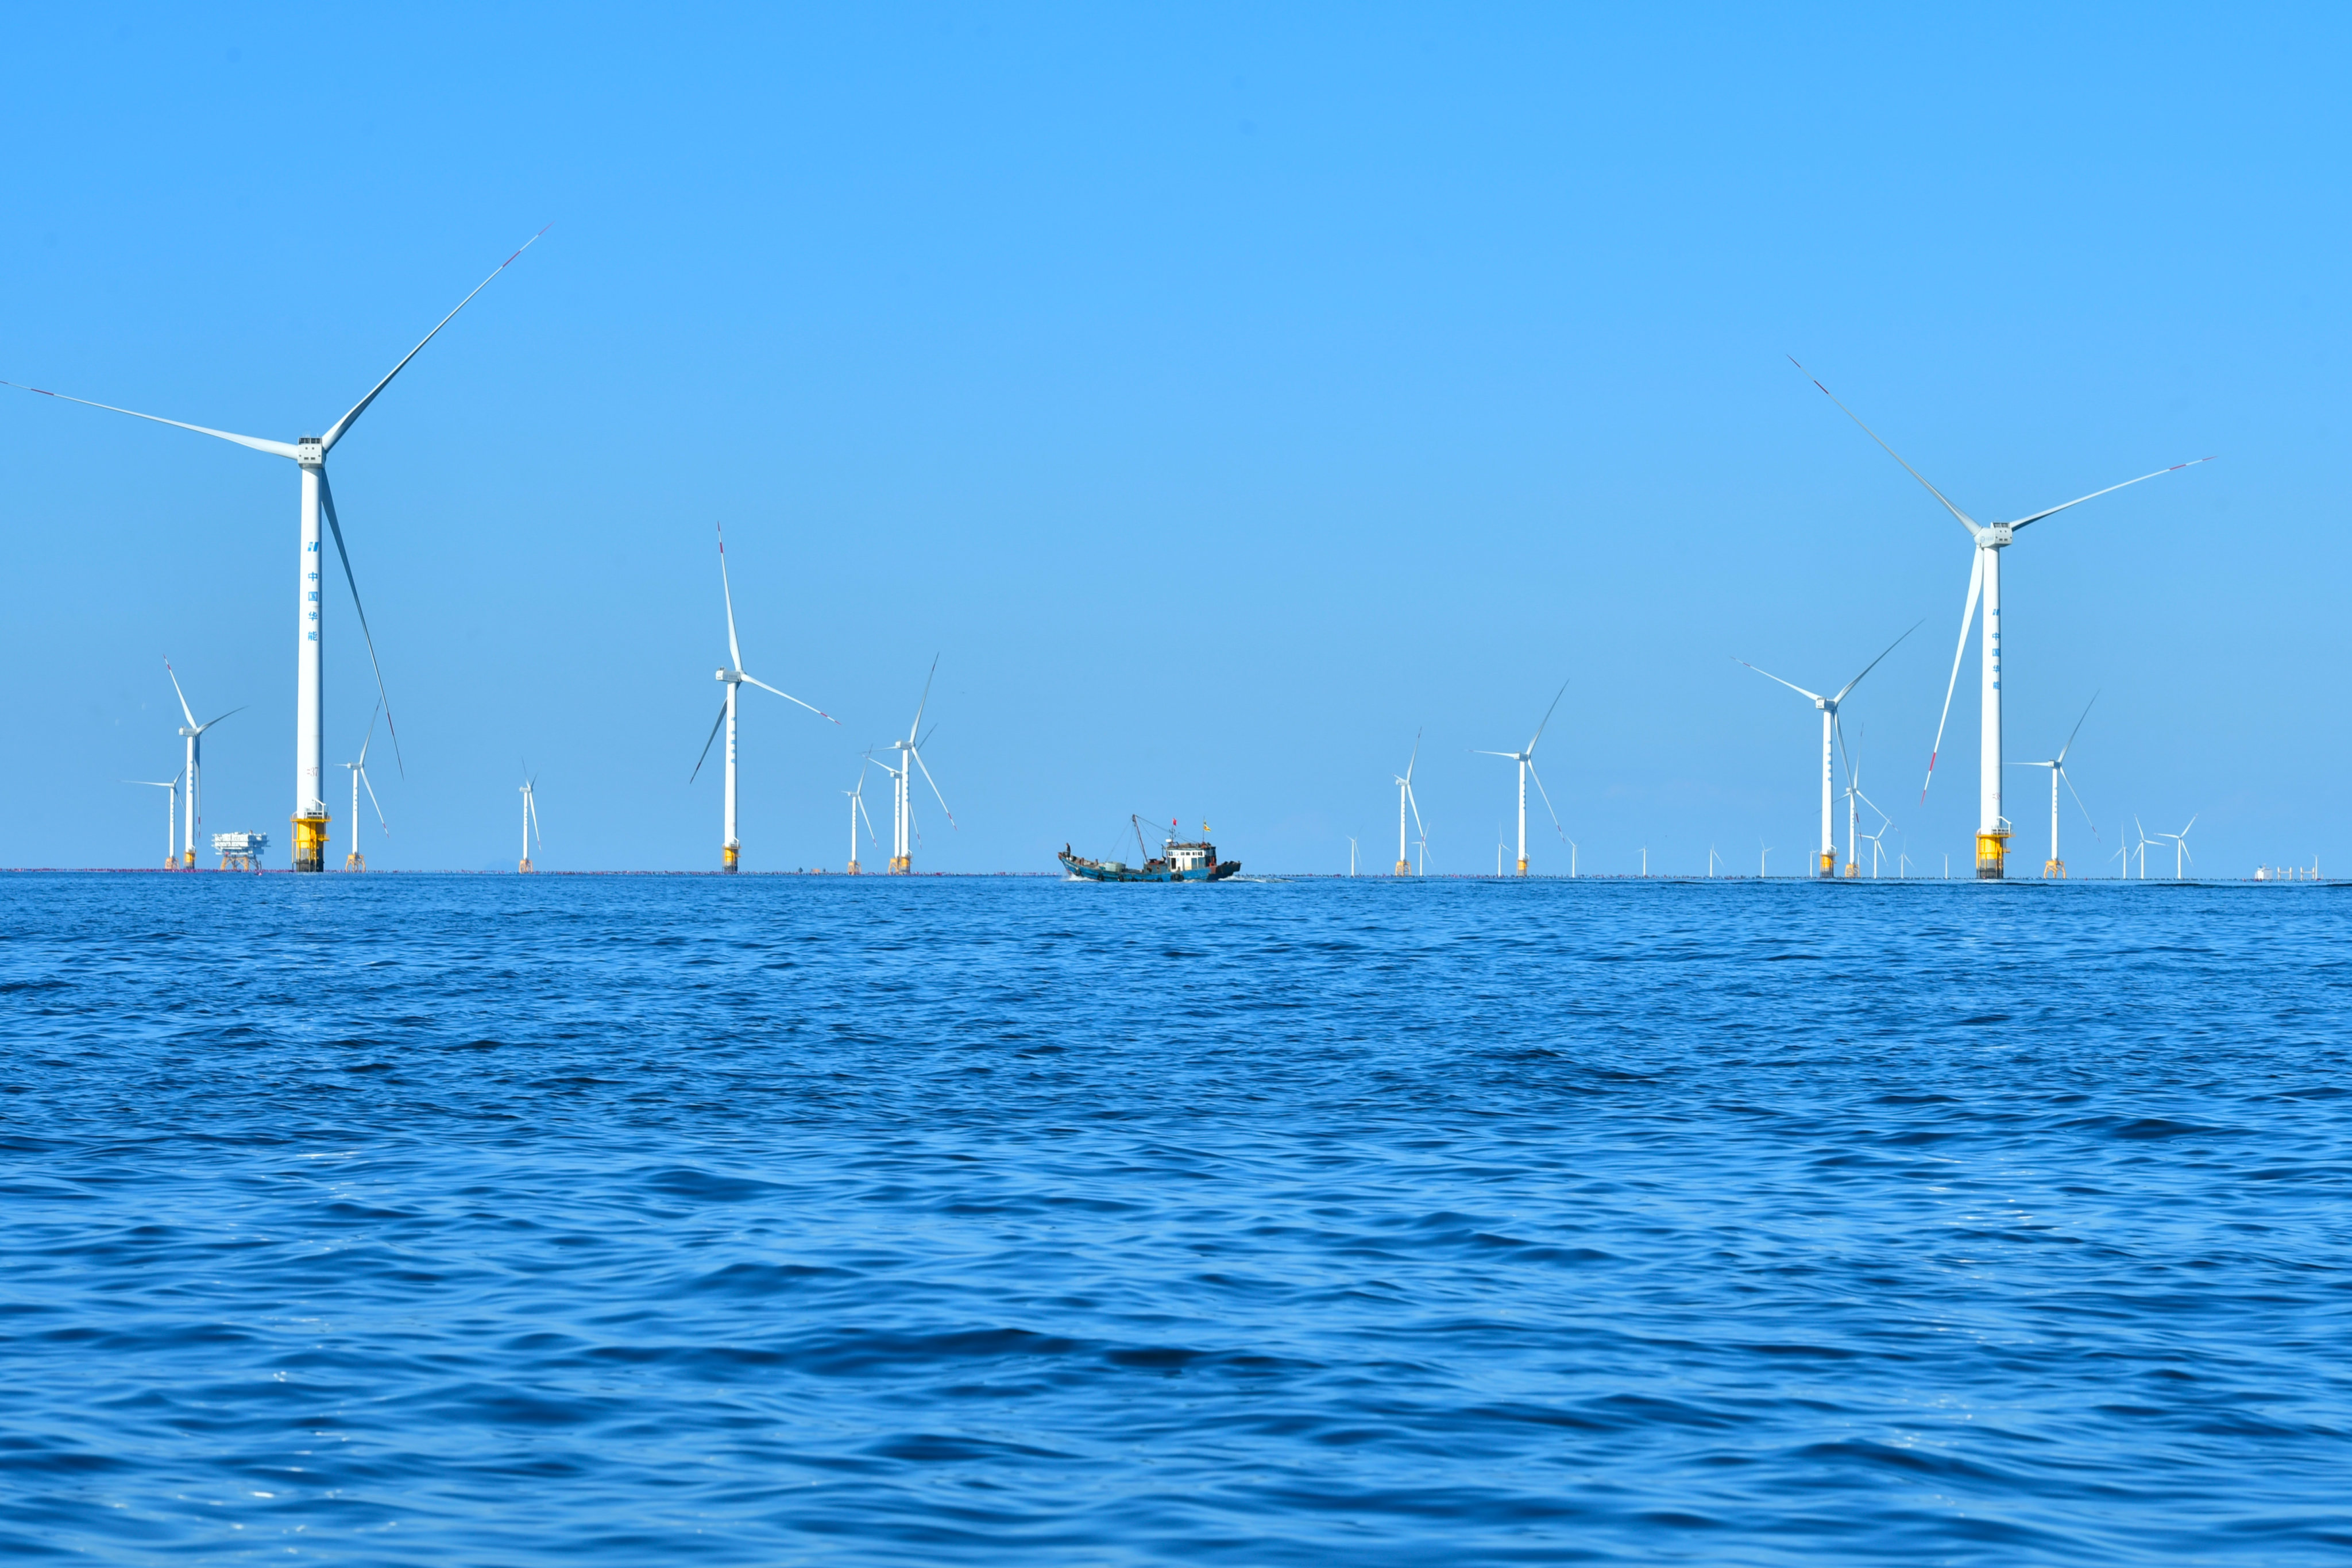 An offshore wind farm in Dalian City of northeast China’s Liaoning Province. Photo: Xinhua